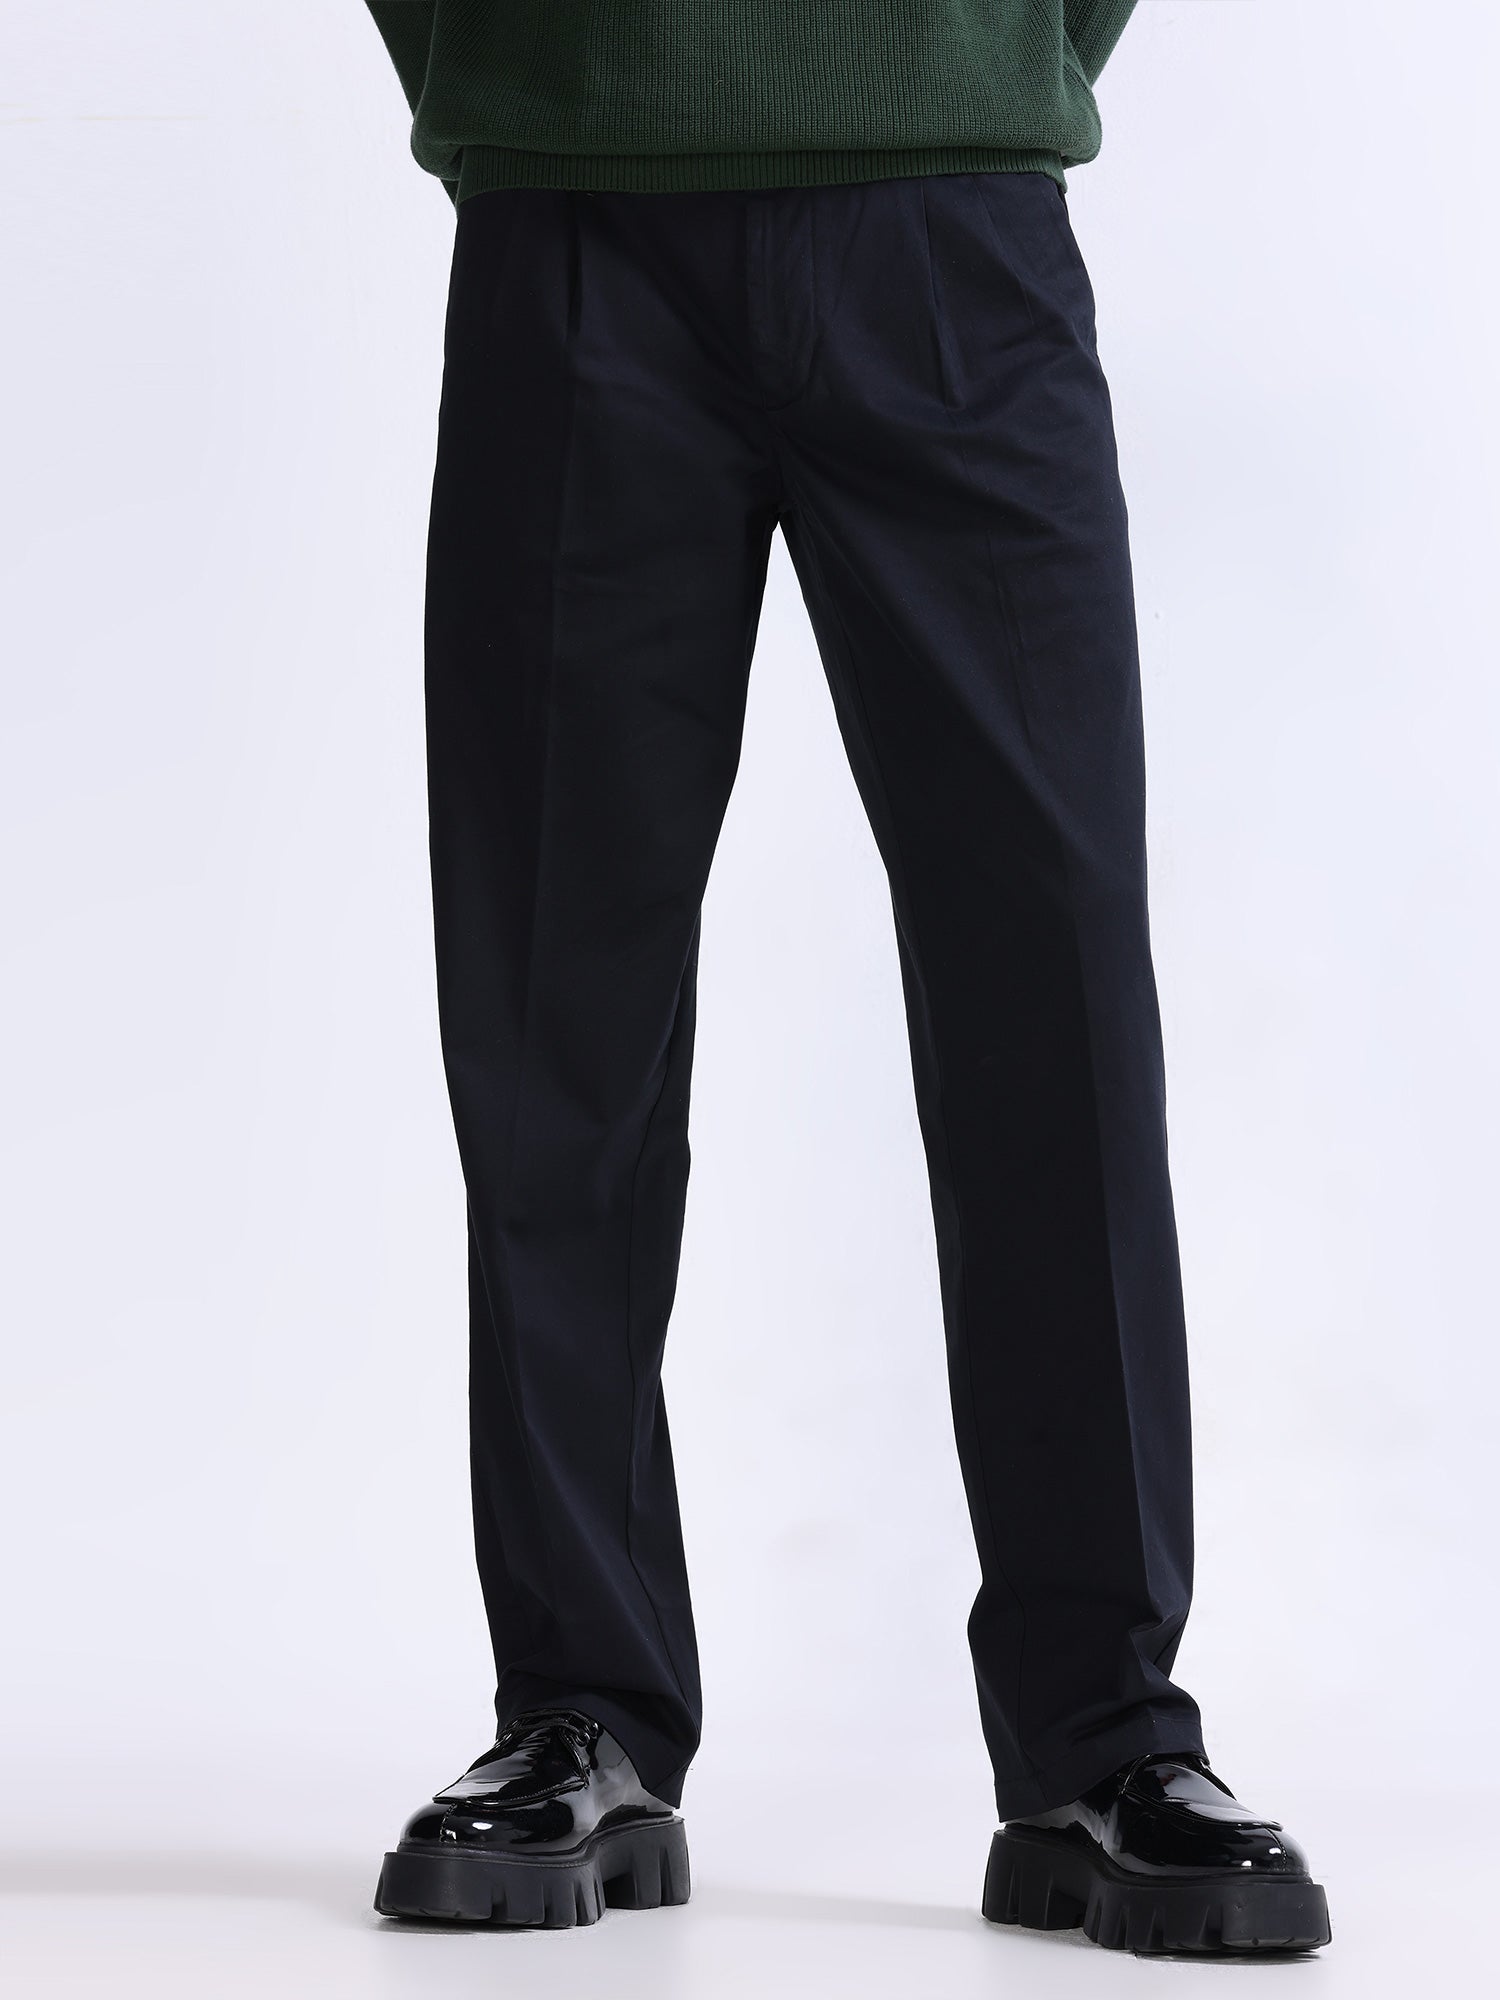 Reiss Brighton Pleated Relaxed Trousers, Black at John Lewis & Partners